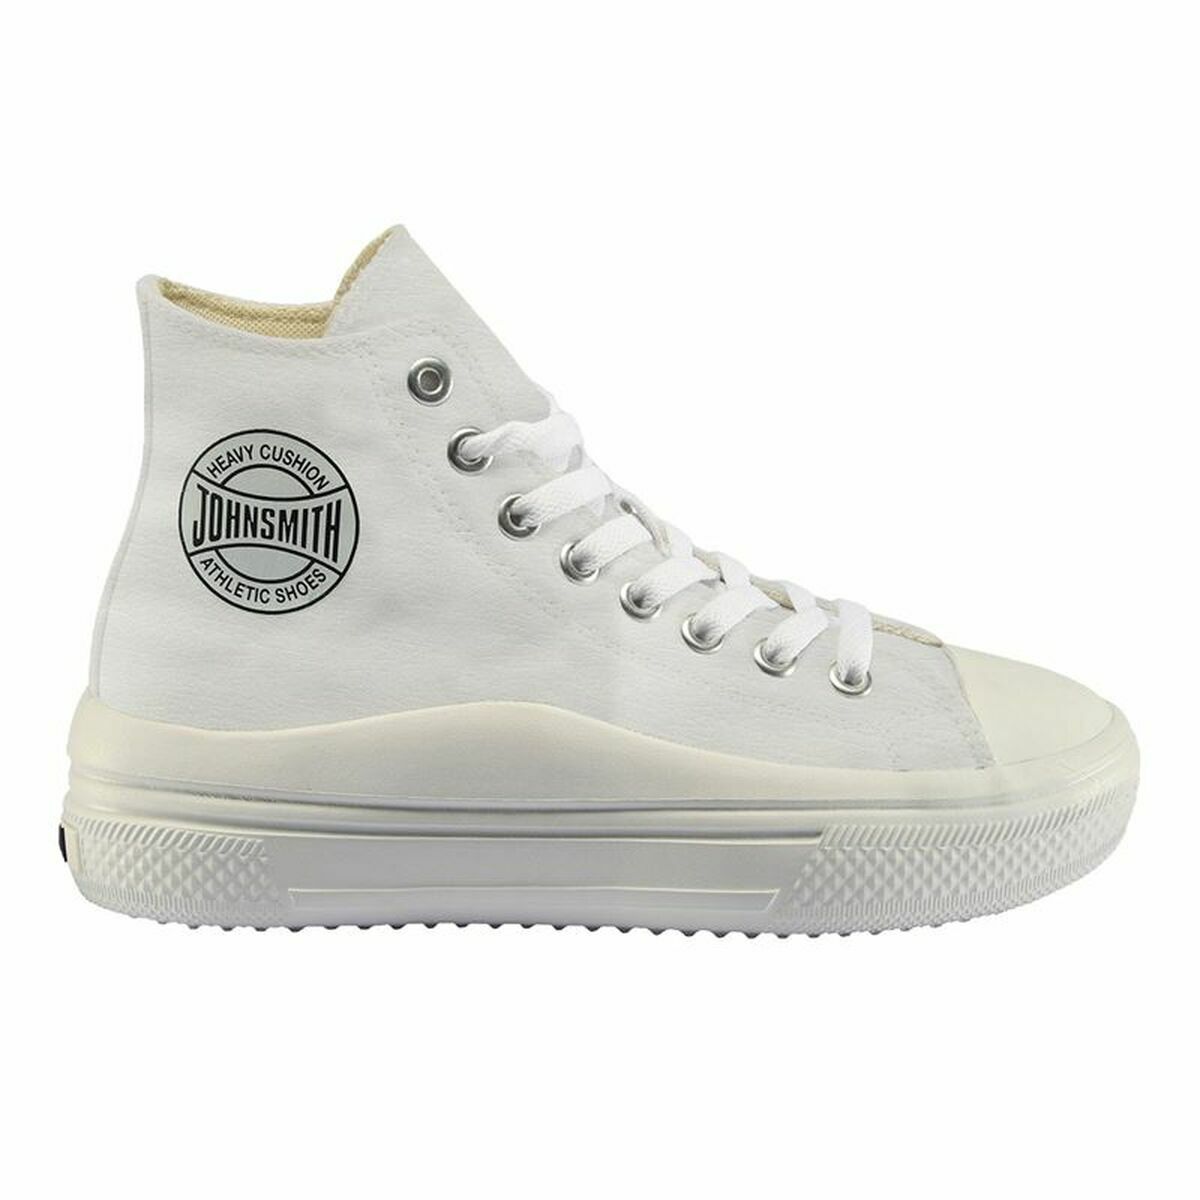 Baskets Casual pour Femme John Smith Licy High Blanc